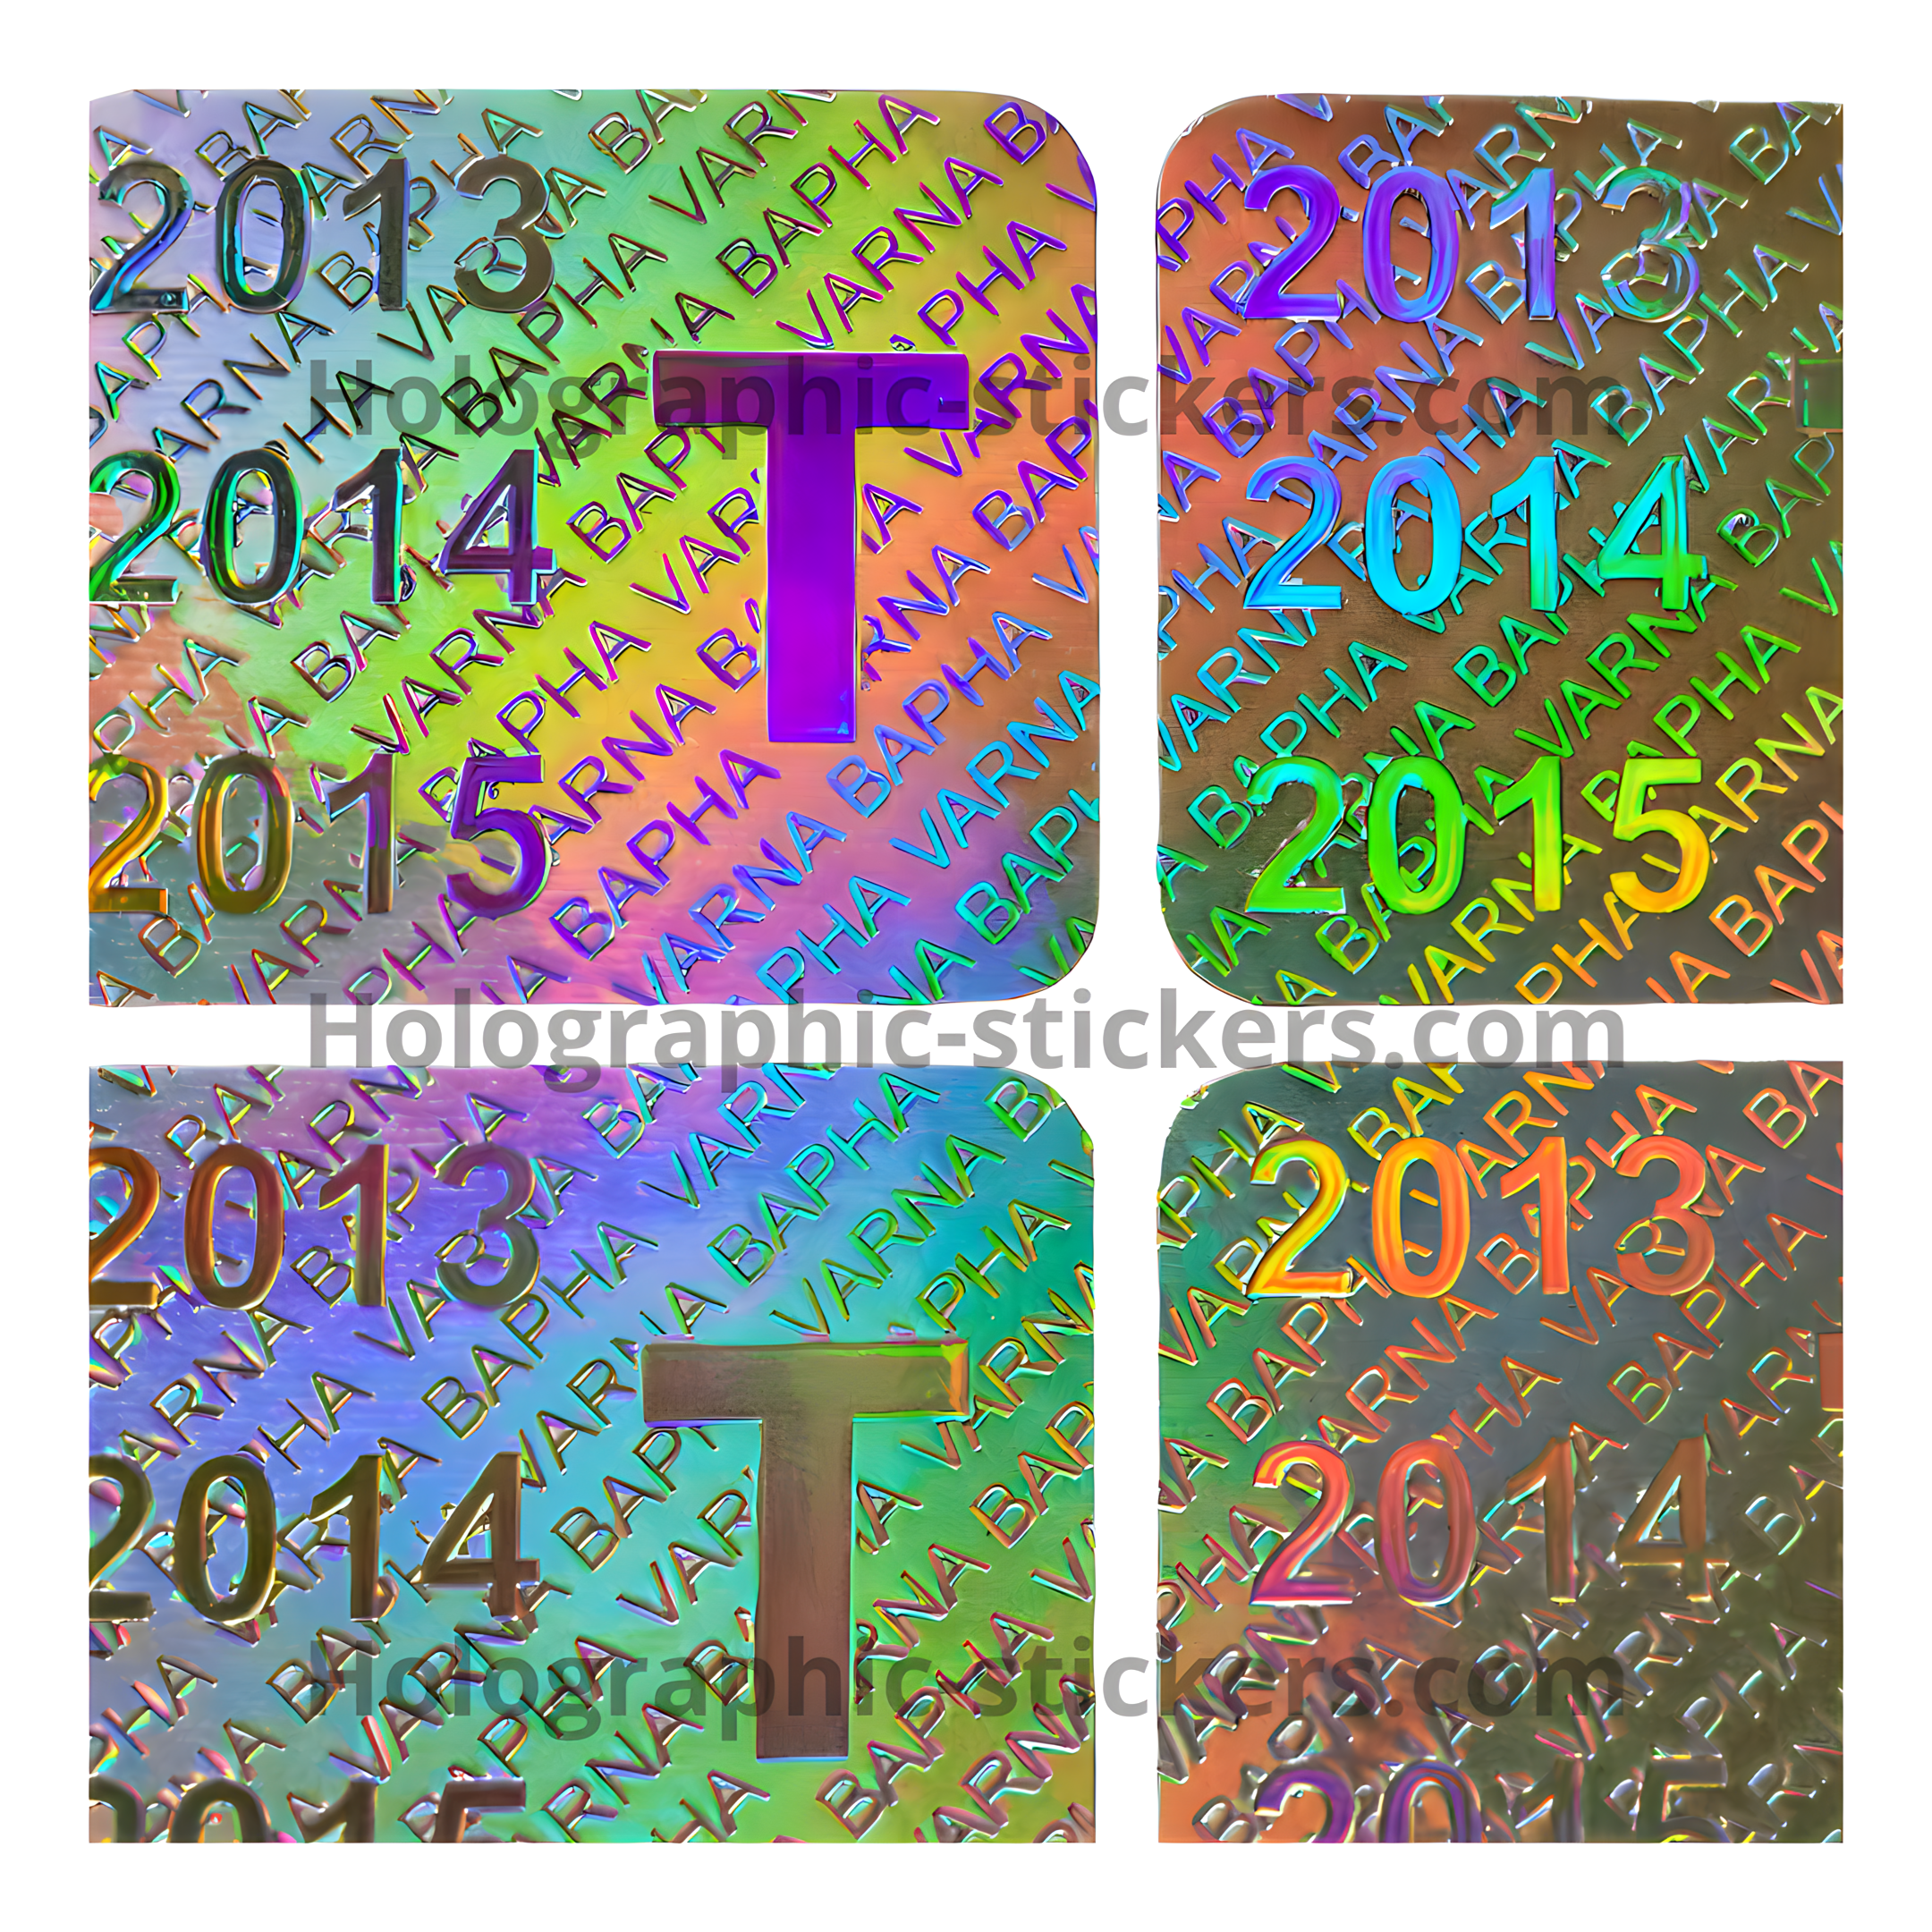 Holographic stickers for license products certificates tickets cards badges documents diplomas proof